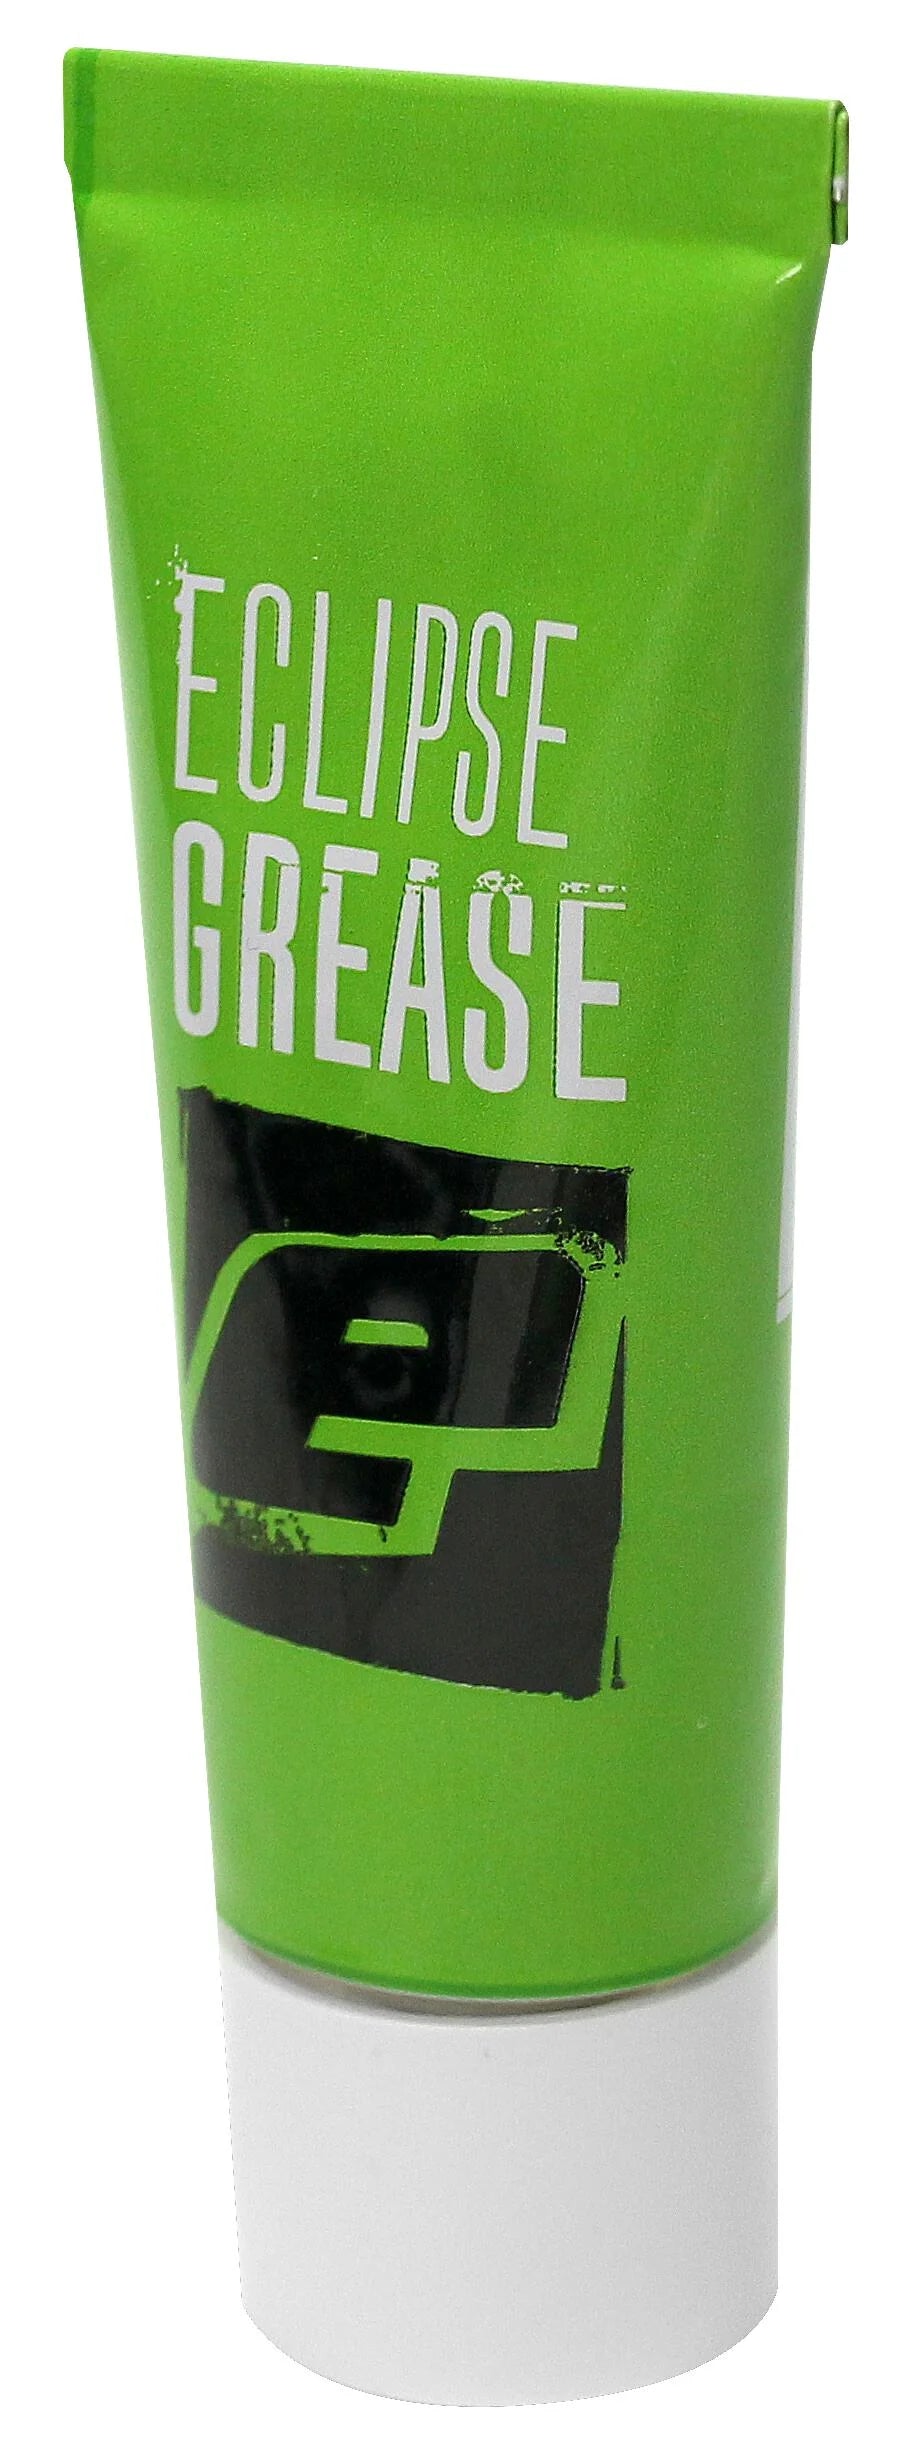 Eclipse Grease